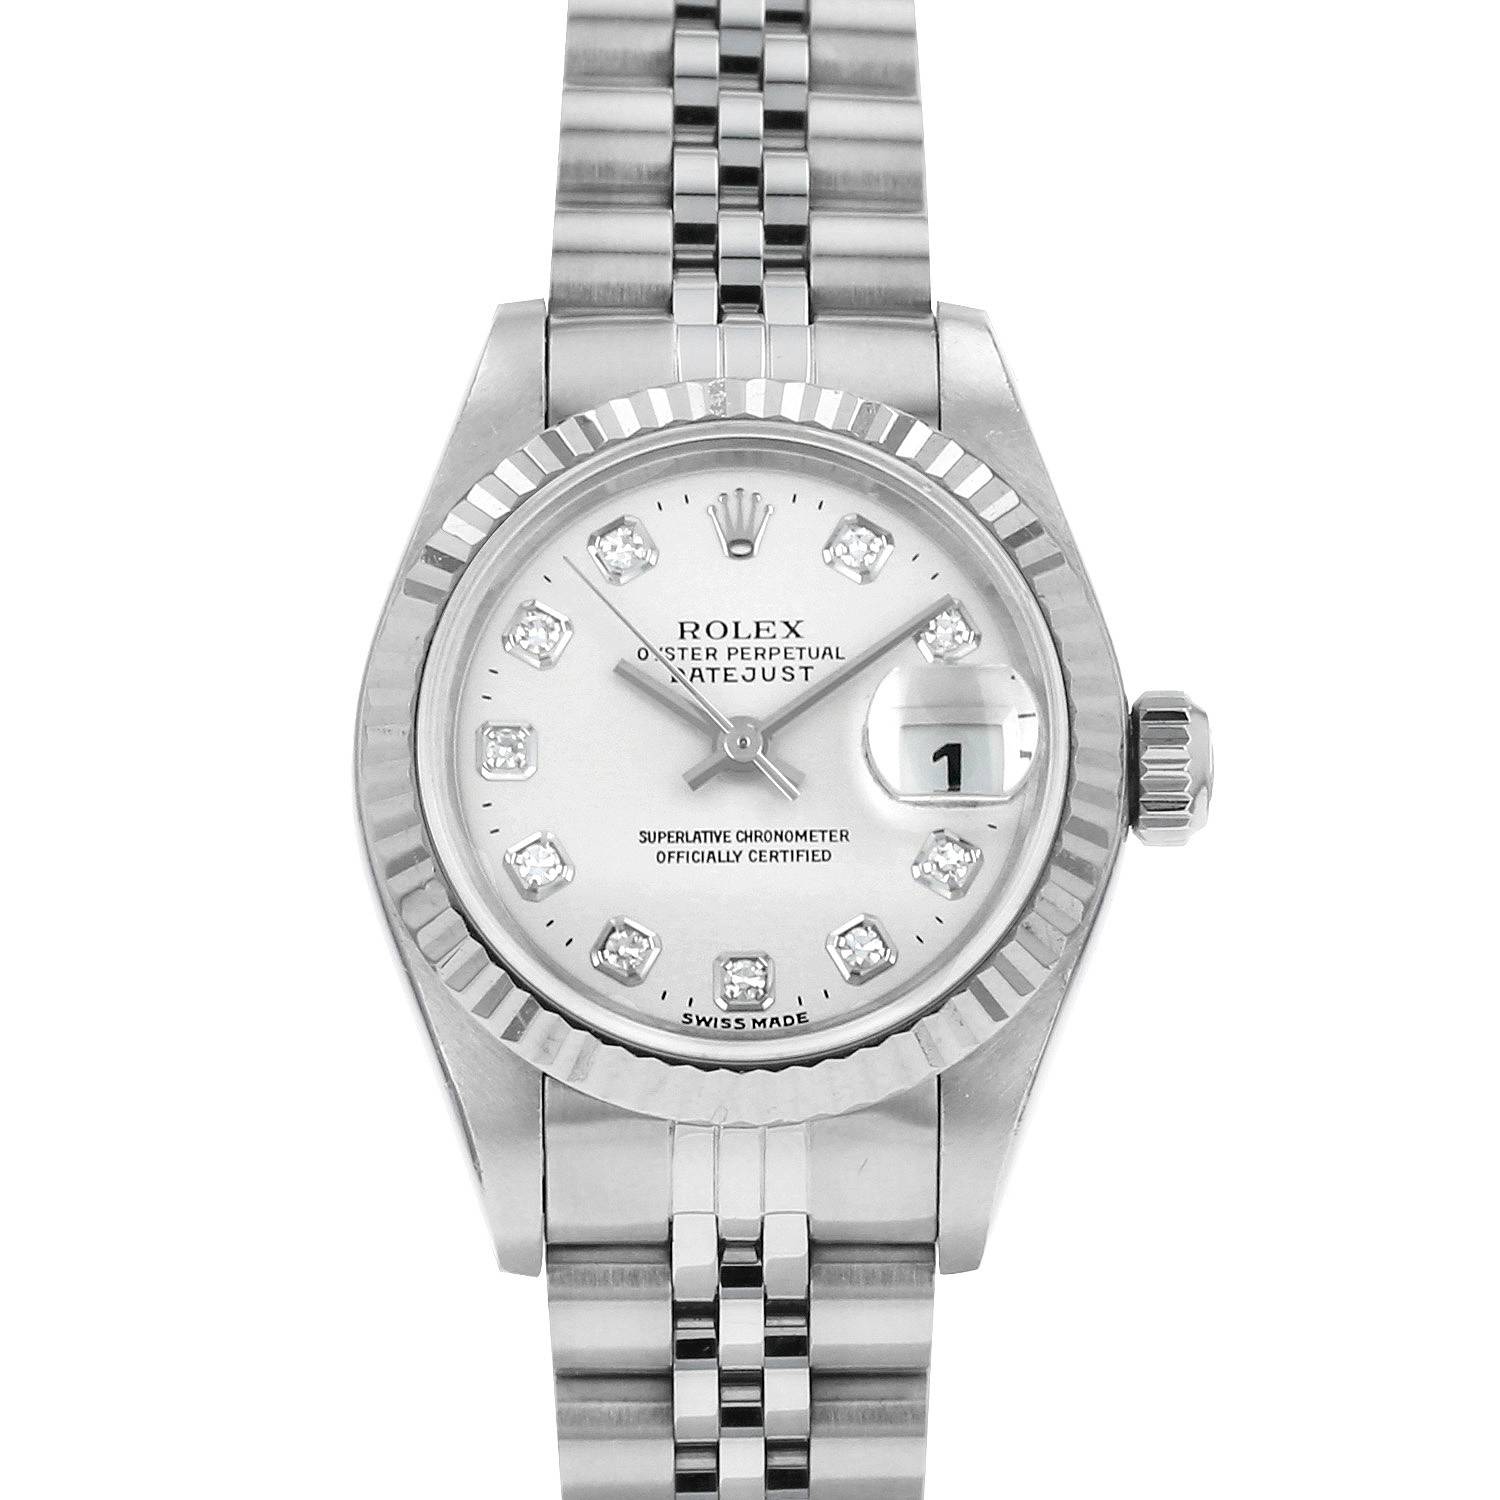 Datejust Lady In And Stainless Steel Ref: 69174